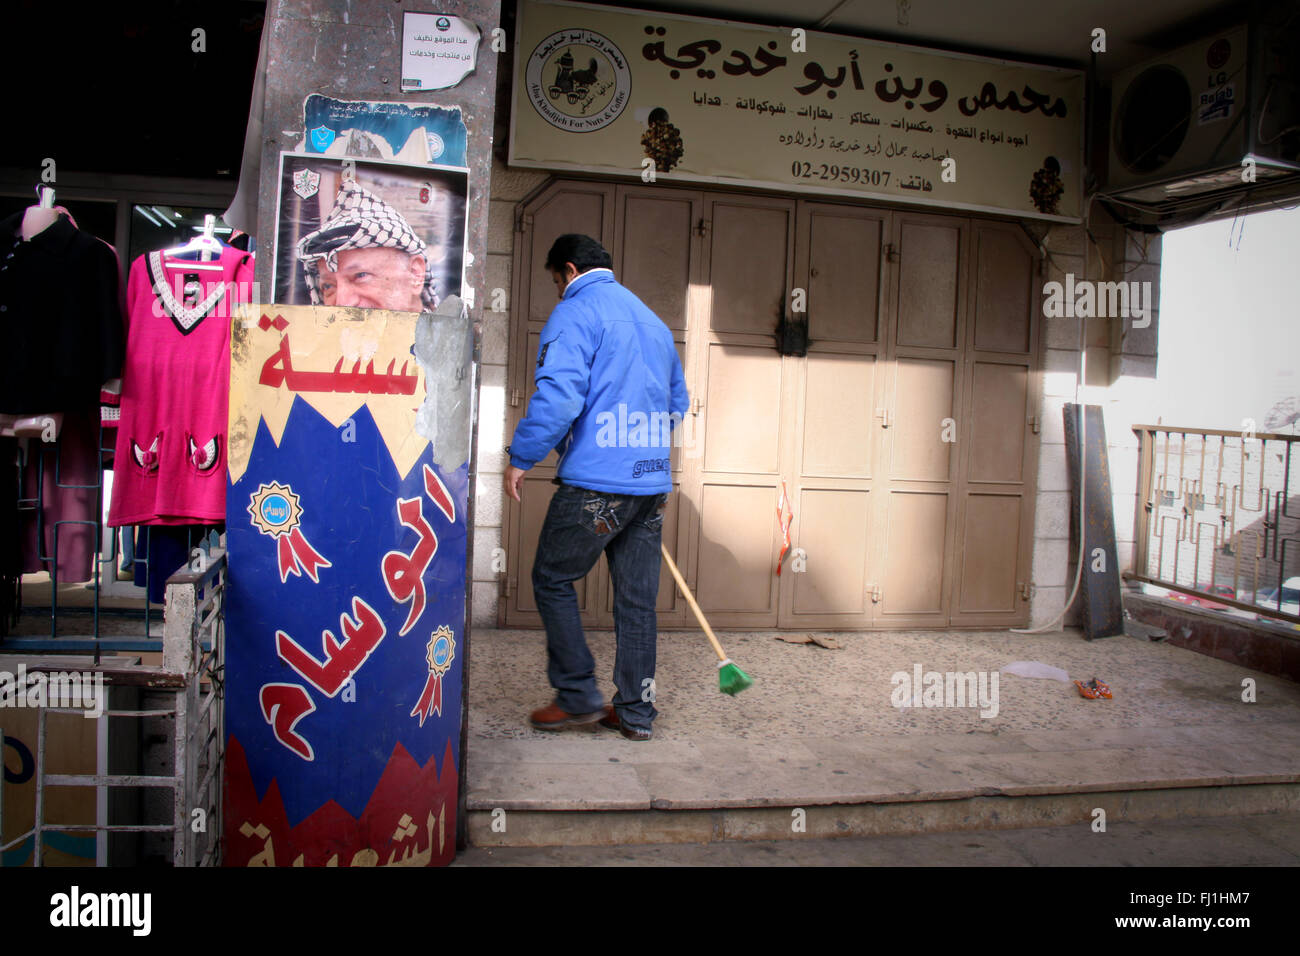 A man walks in the streets of Ramallah , Palestine , with portrait of Yasser Araphat on the wall Stock Photo